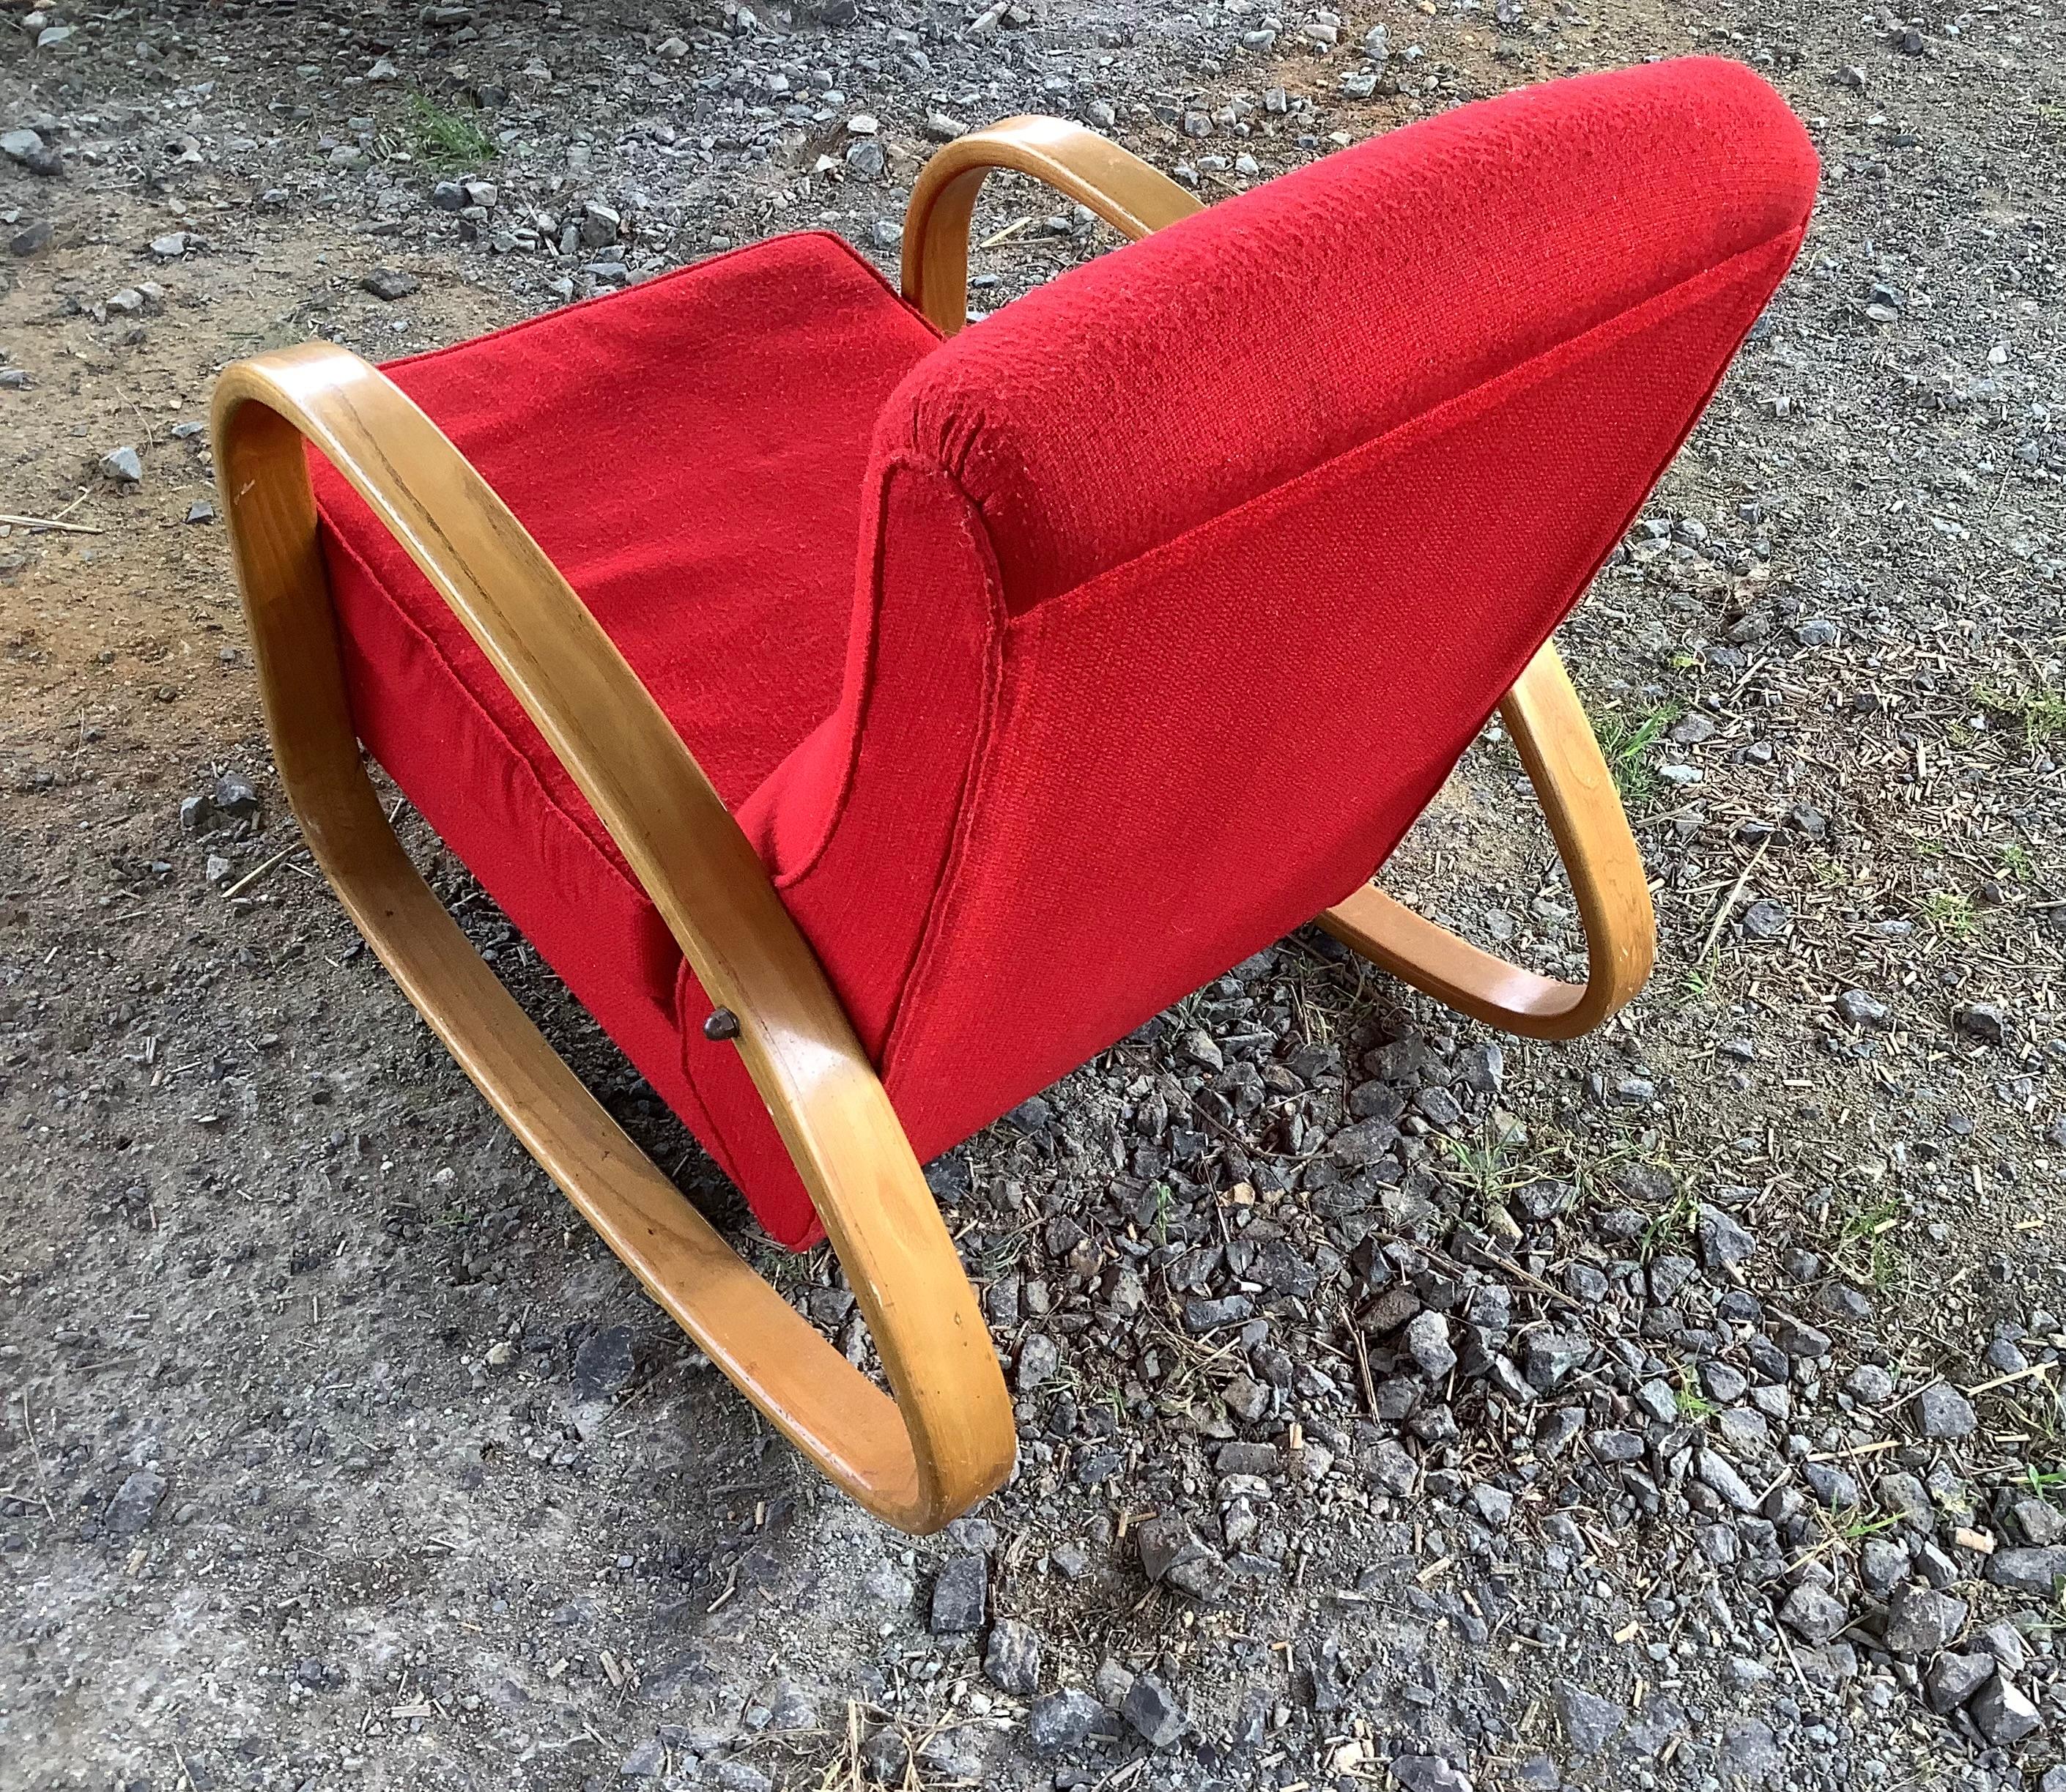 well crafted rocking chair with streamed bent  wooden  arms 
super comfortable rare armchair.